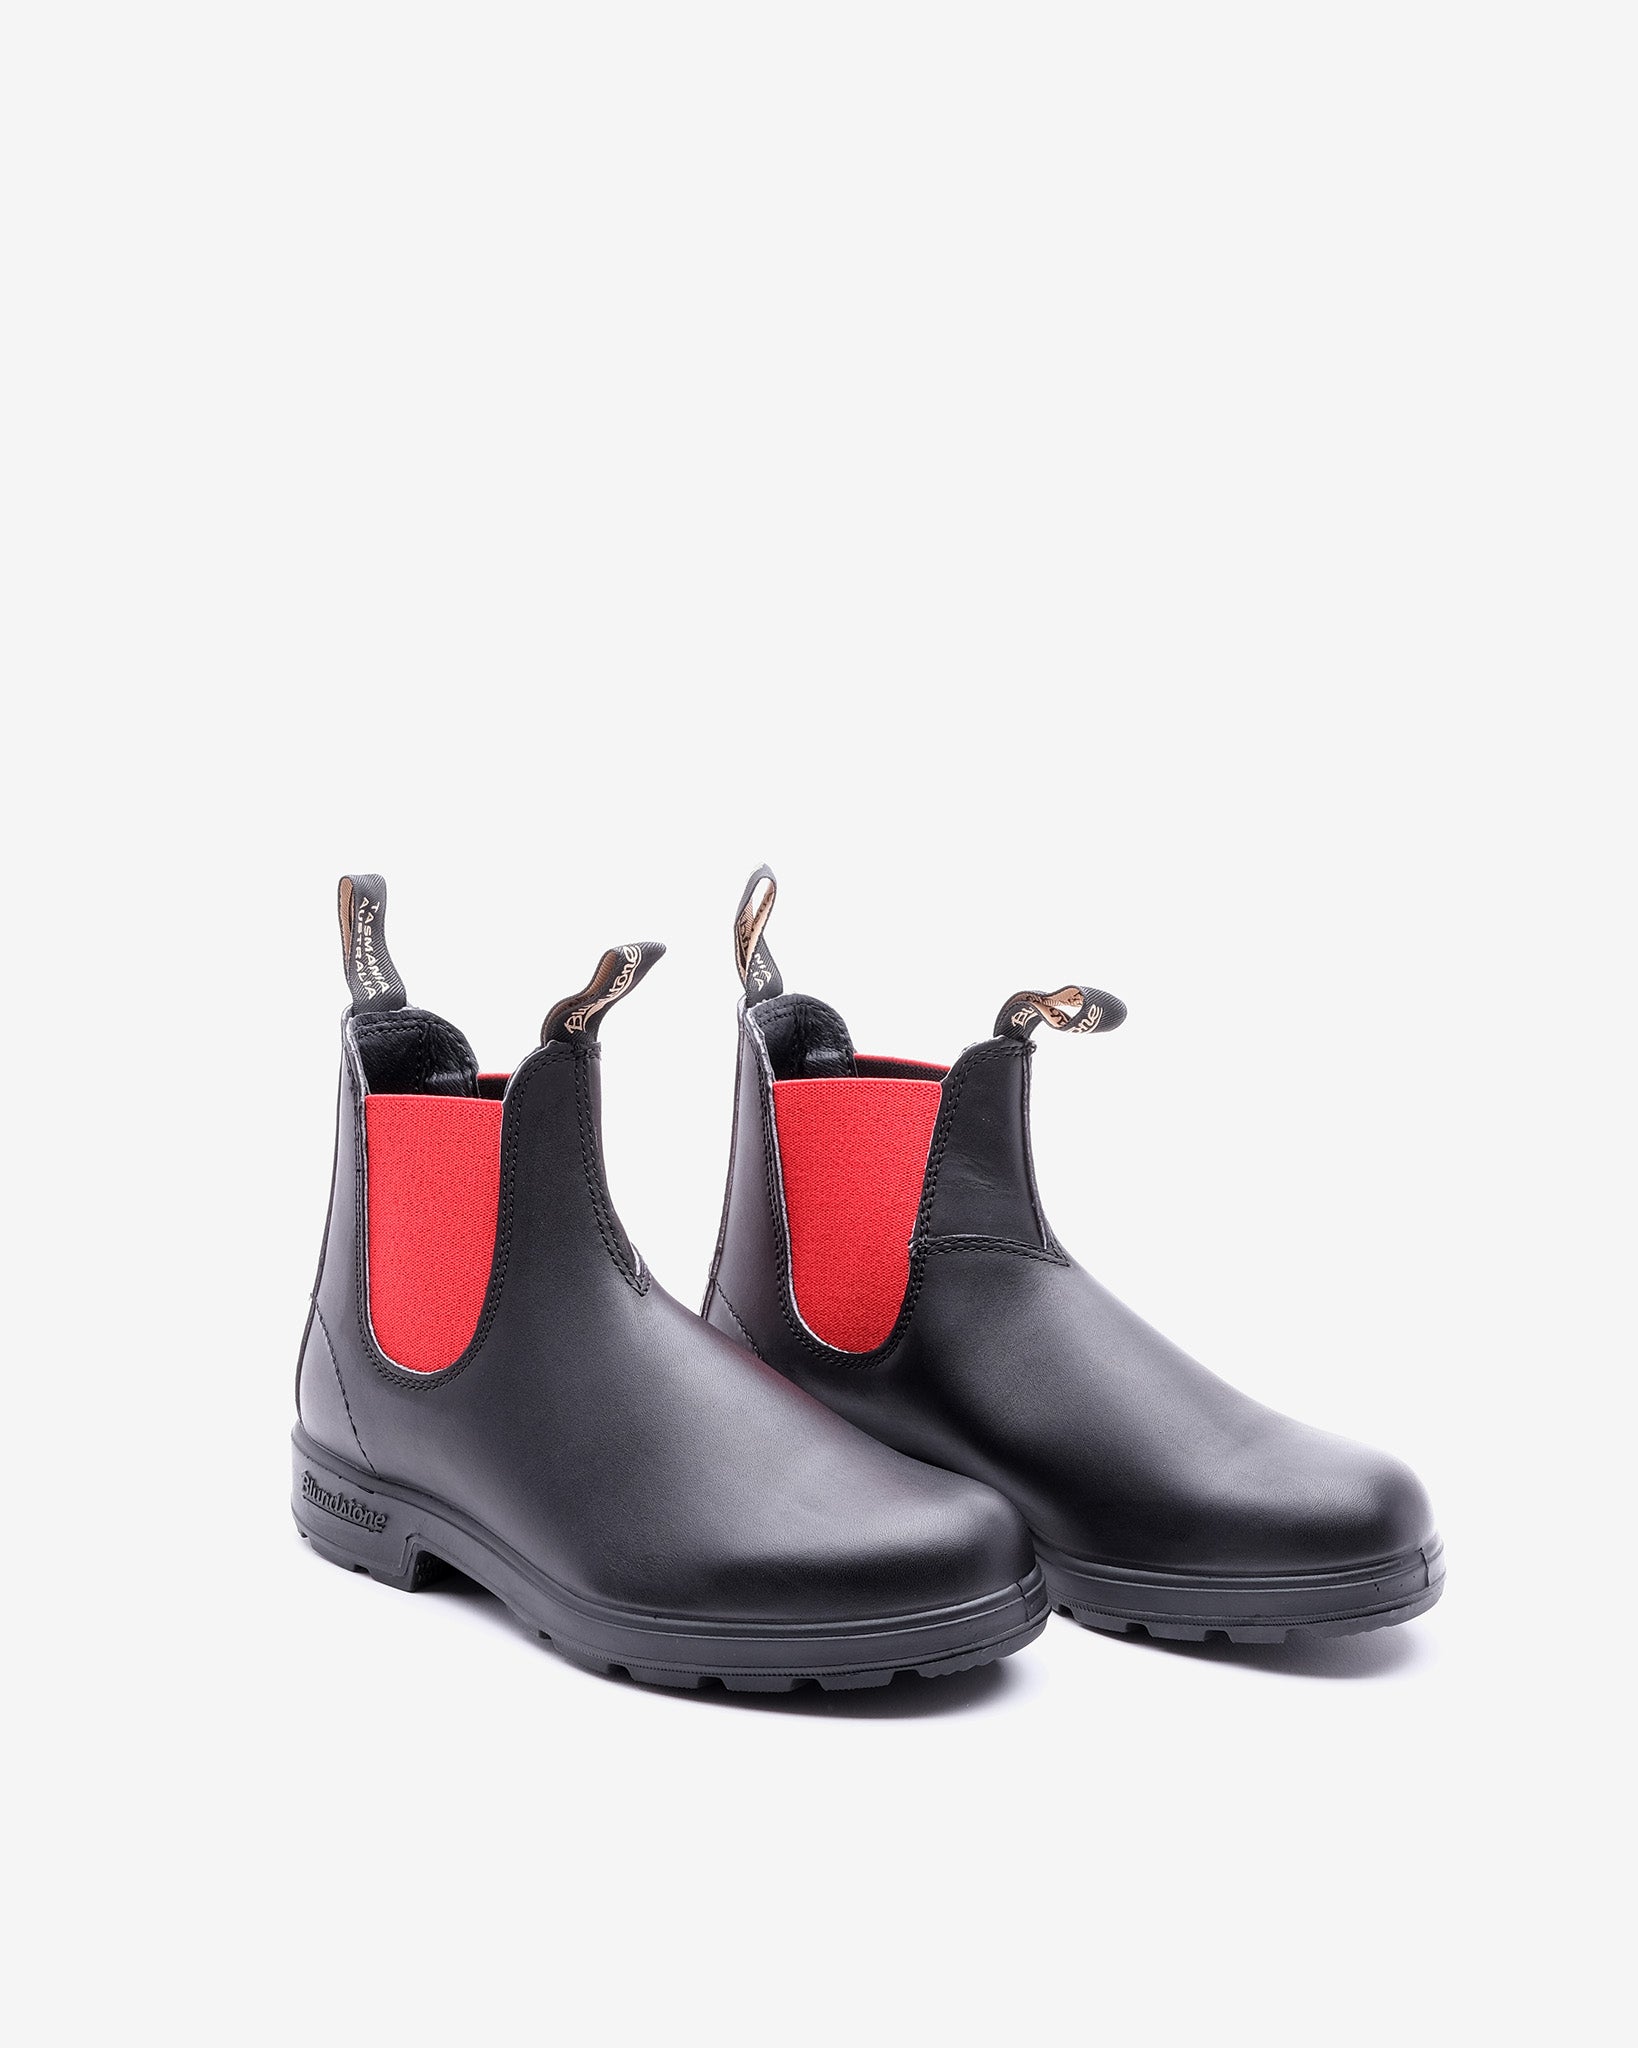 508 Black/Red Leather Boots